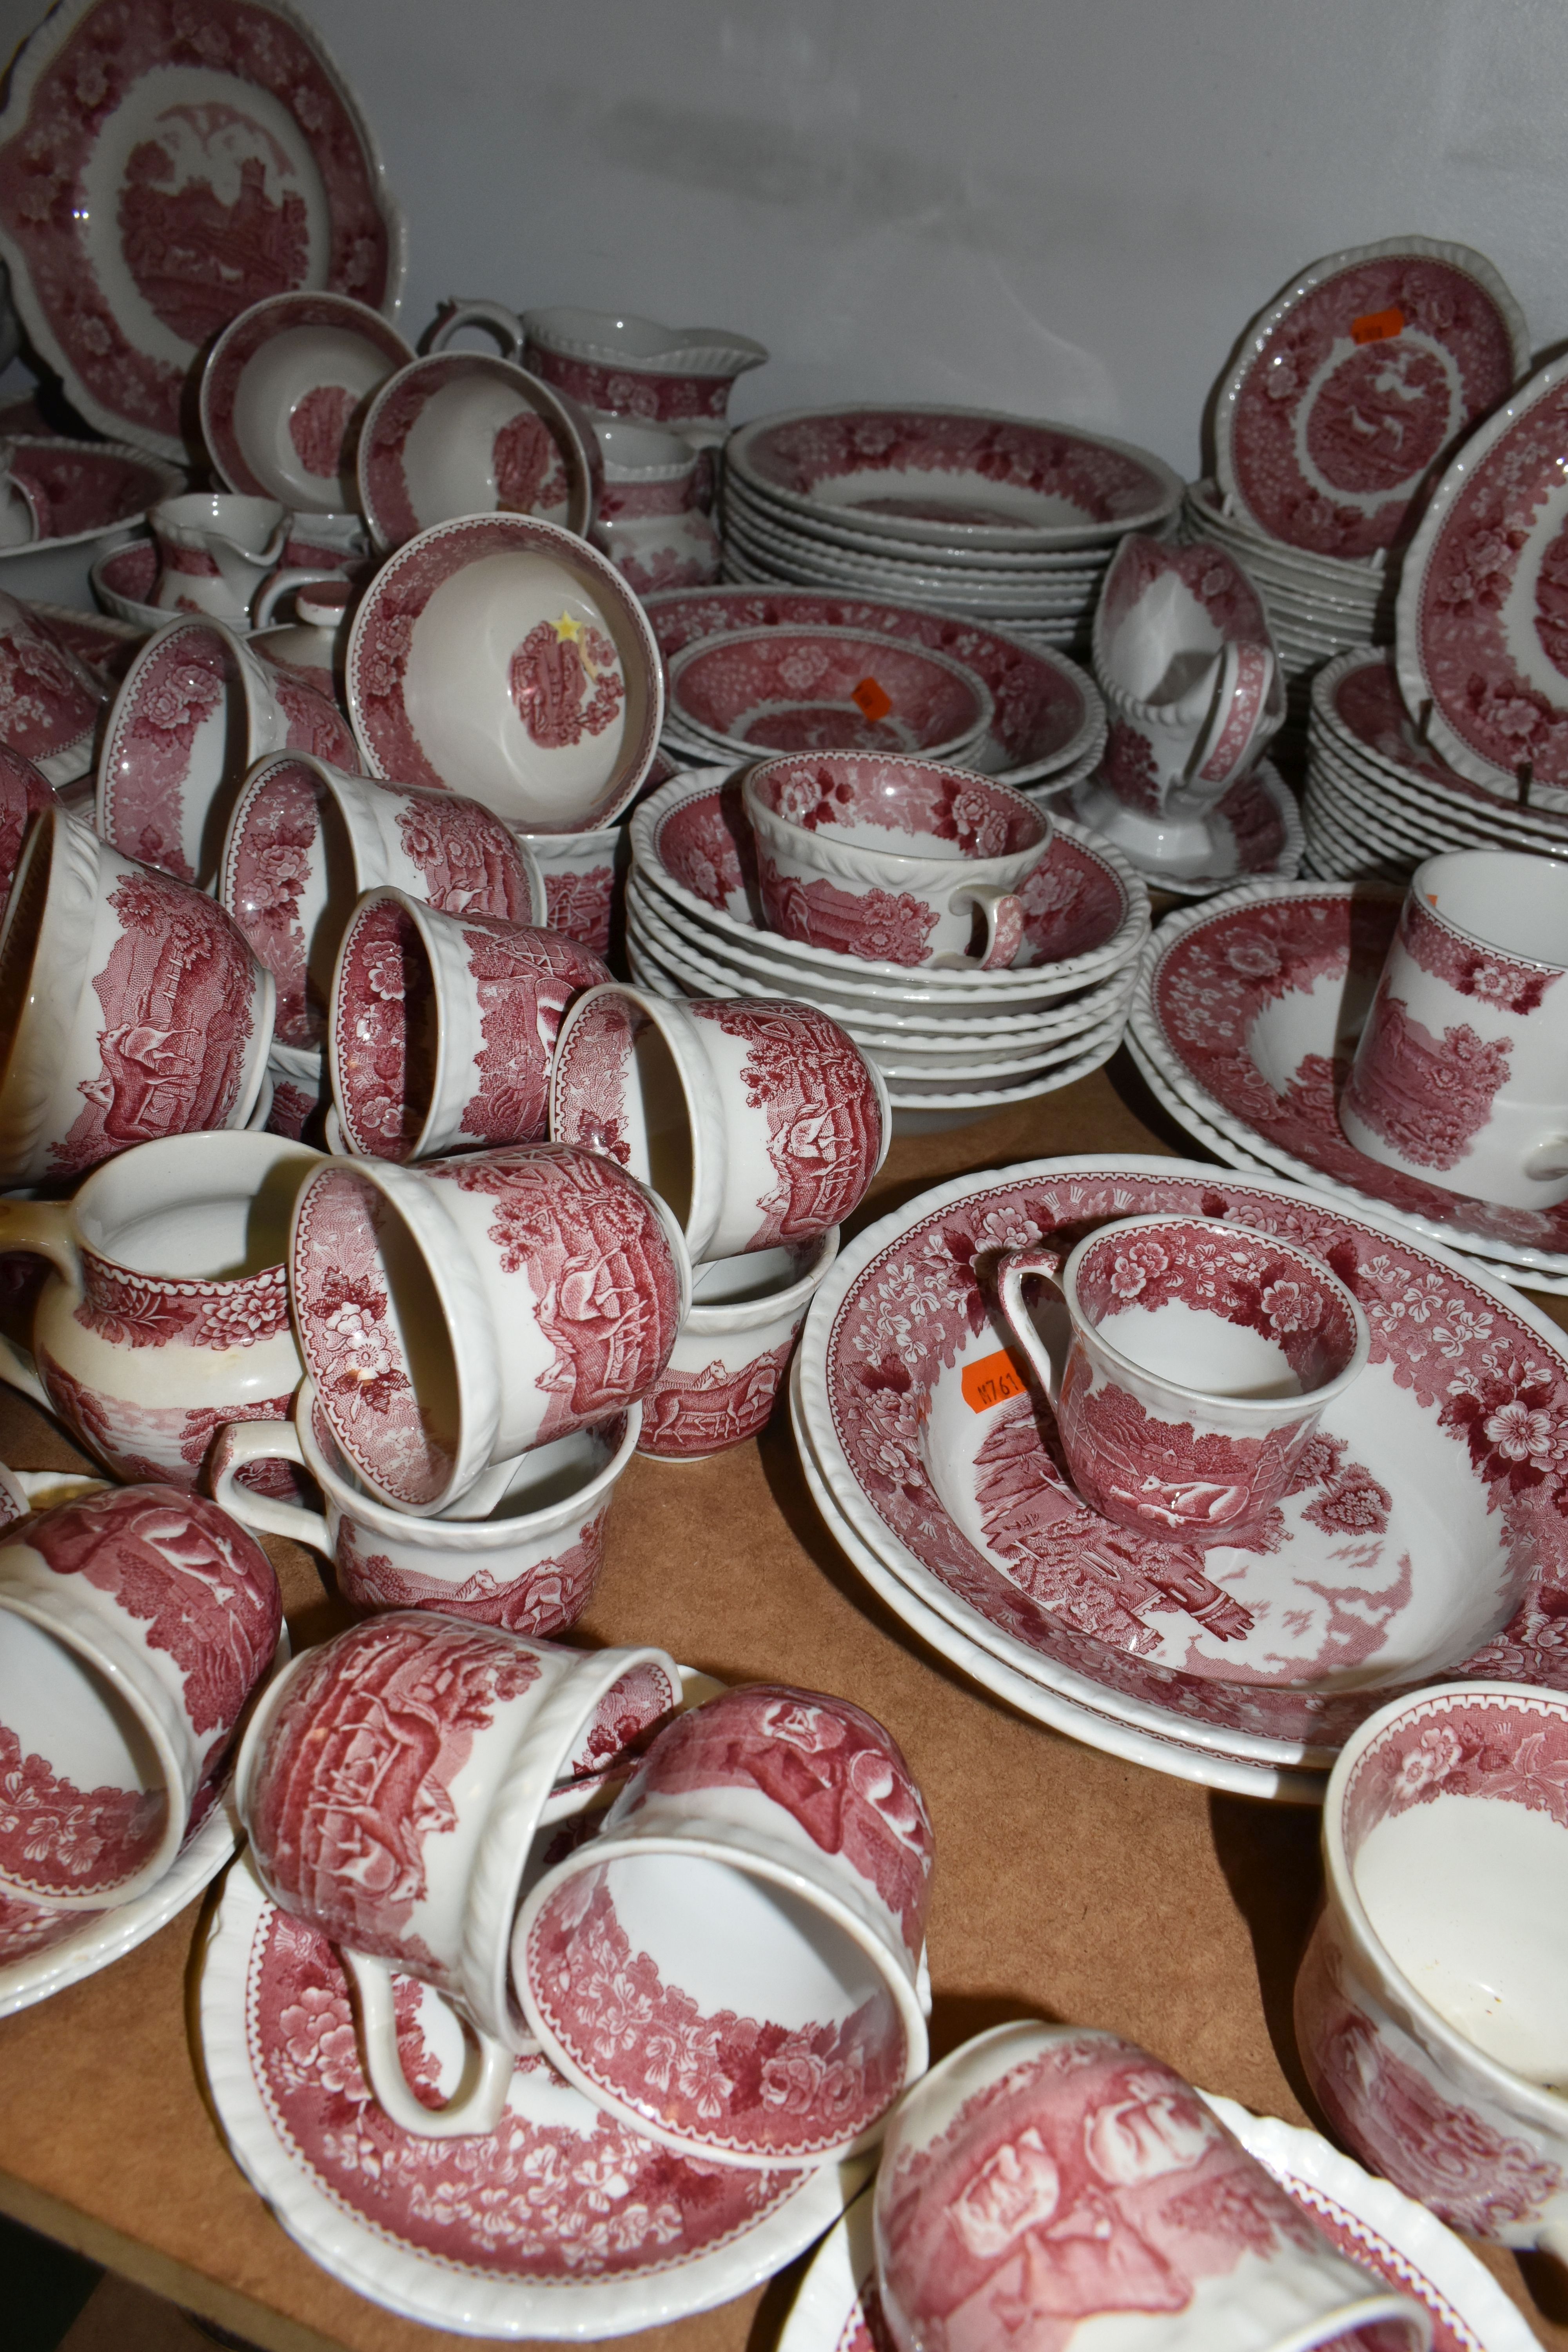 A LARGE COLLECTION OF 'ADAMS' DINNERWARE, red 'English Scenic' pattern including coffee cups, - Image 6 of 8